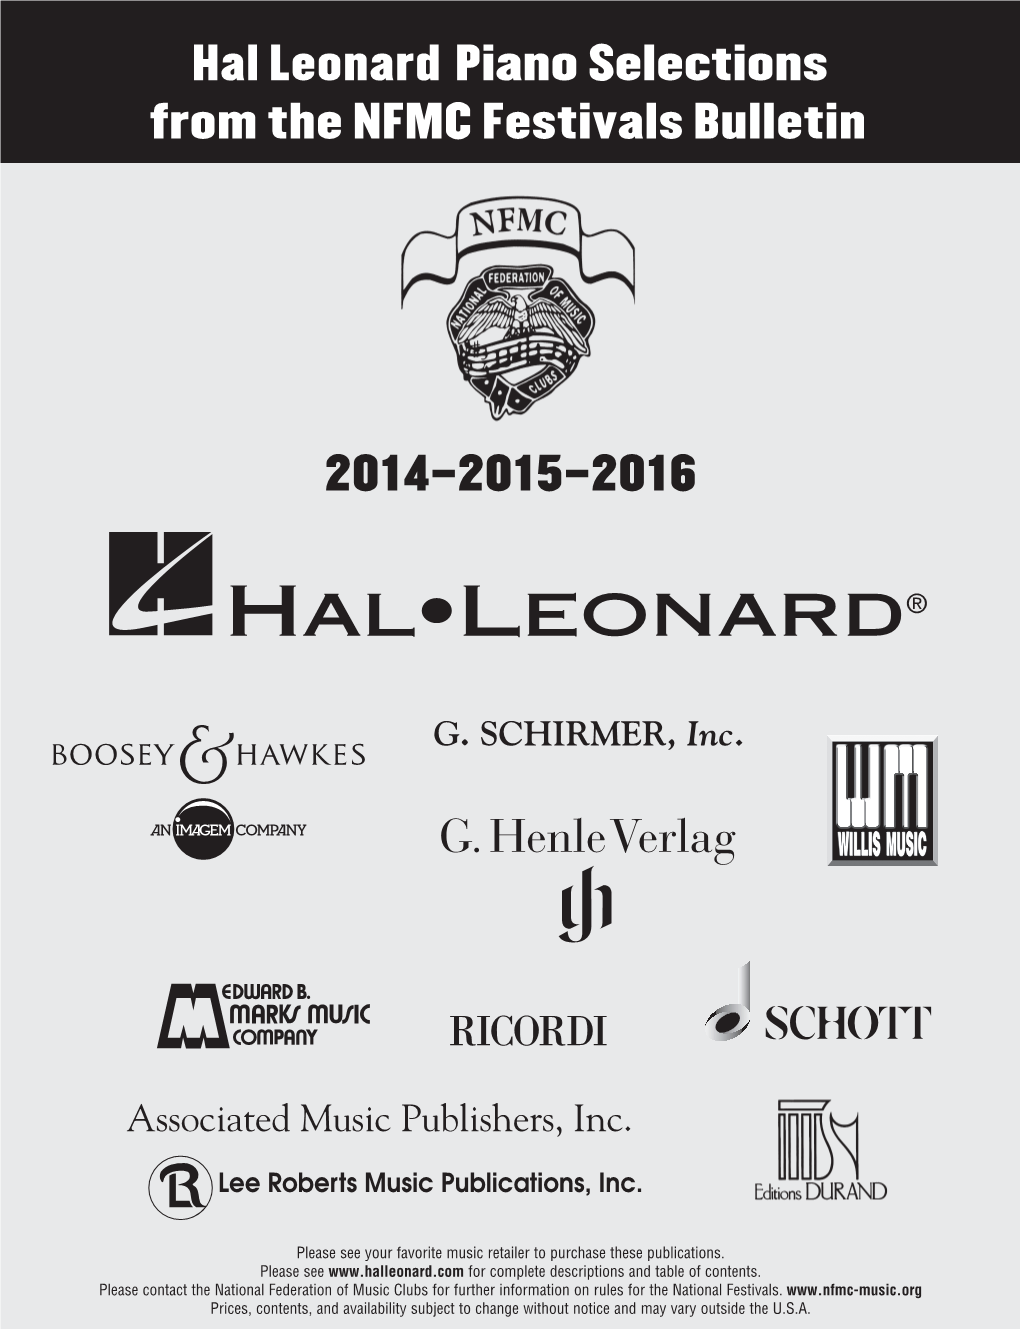 Hal Leonard Piano Selections from the NFMC Festivals Bulletin 2014